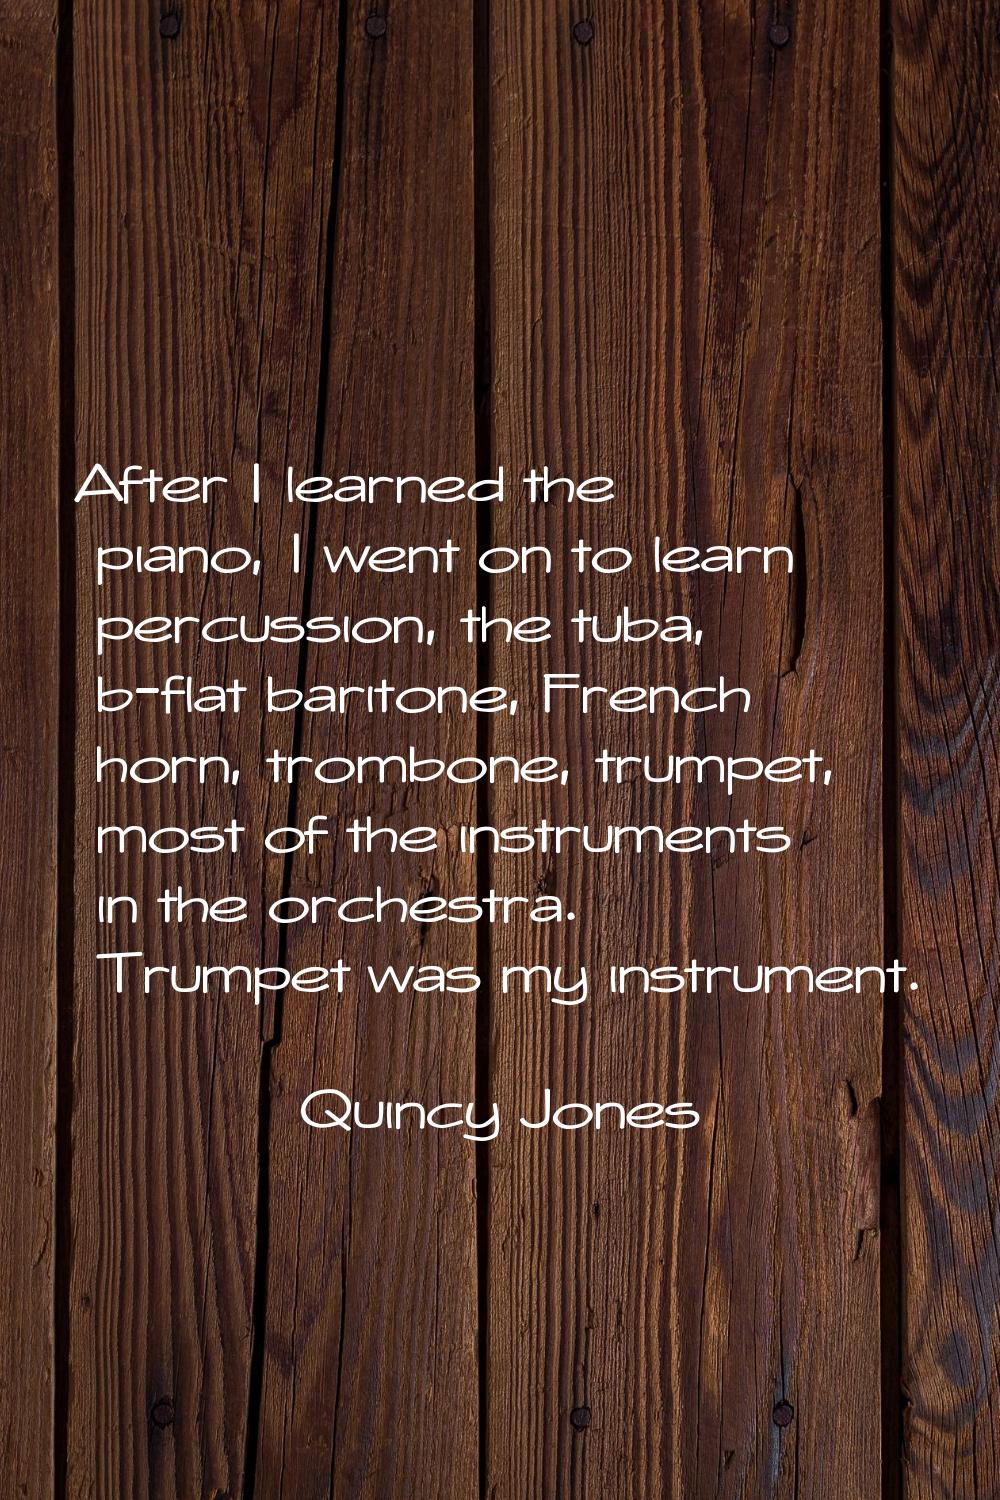 After I learned the piano, I went on to learn percussion, the tuba, b-flat baritone, French horn, t